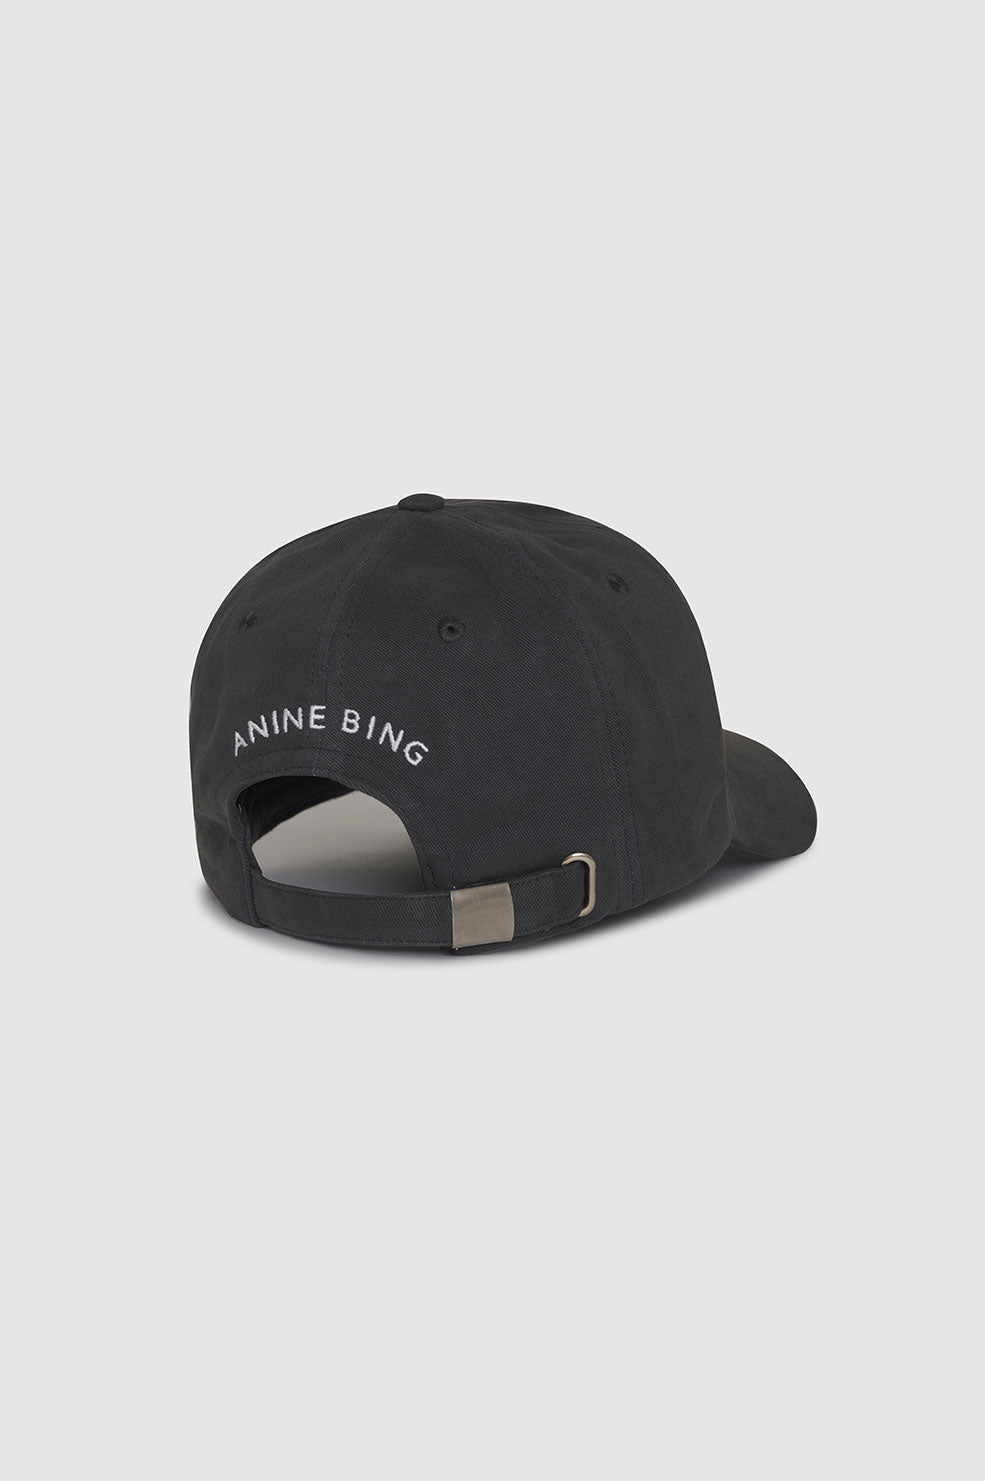 The bestselling Anine Bing Jeremy Baseball Cap is coming back in Green  Khaki 🙌🏻 TAP TO PRE ORDER >>> • • • #aninebing #anineb